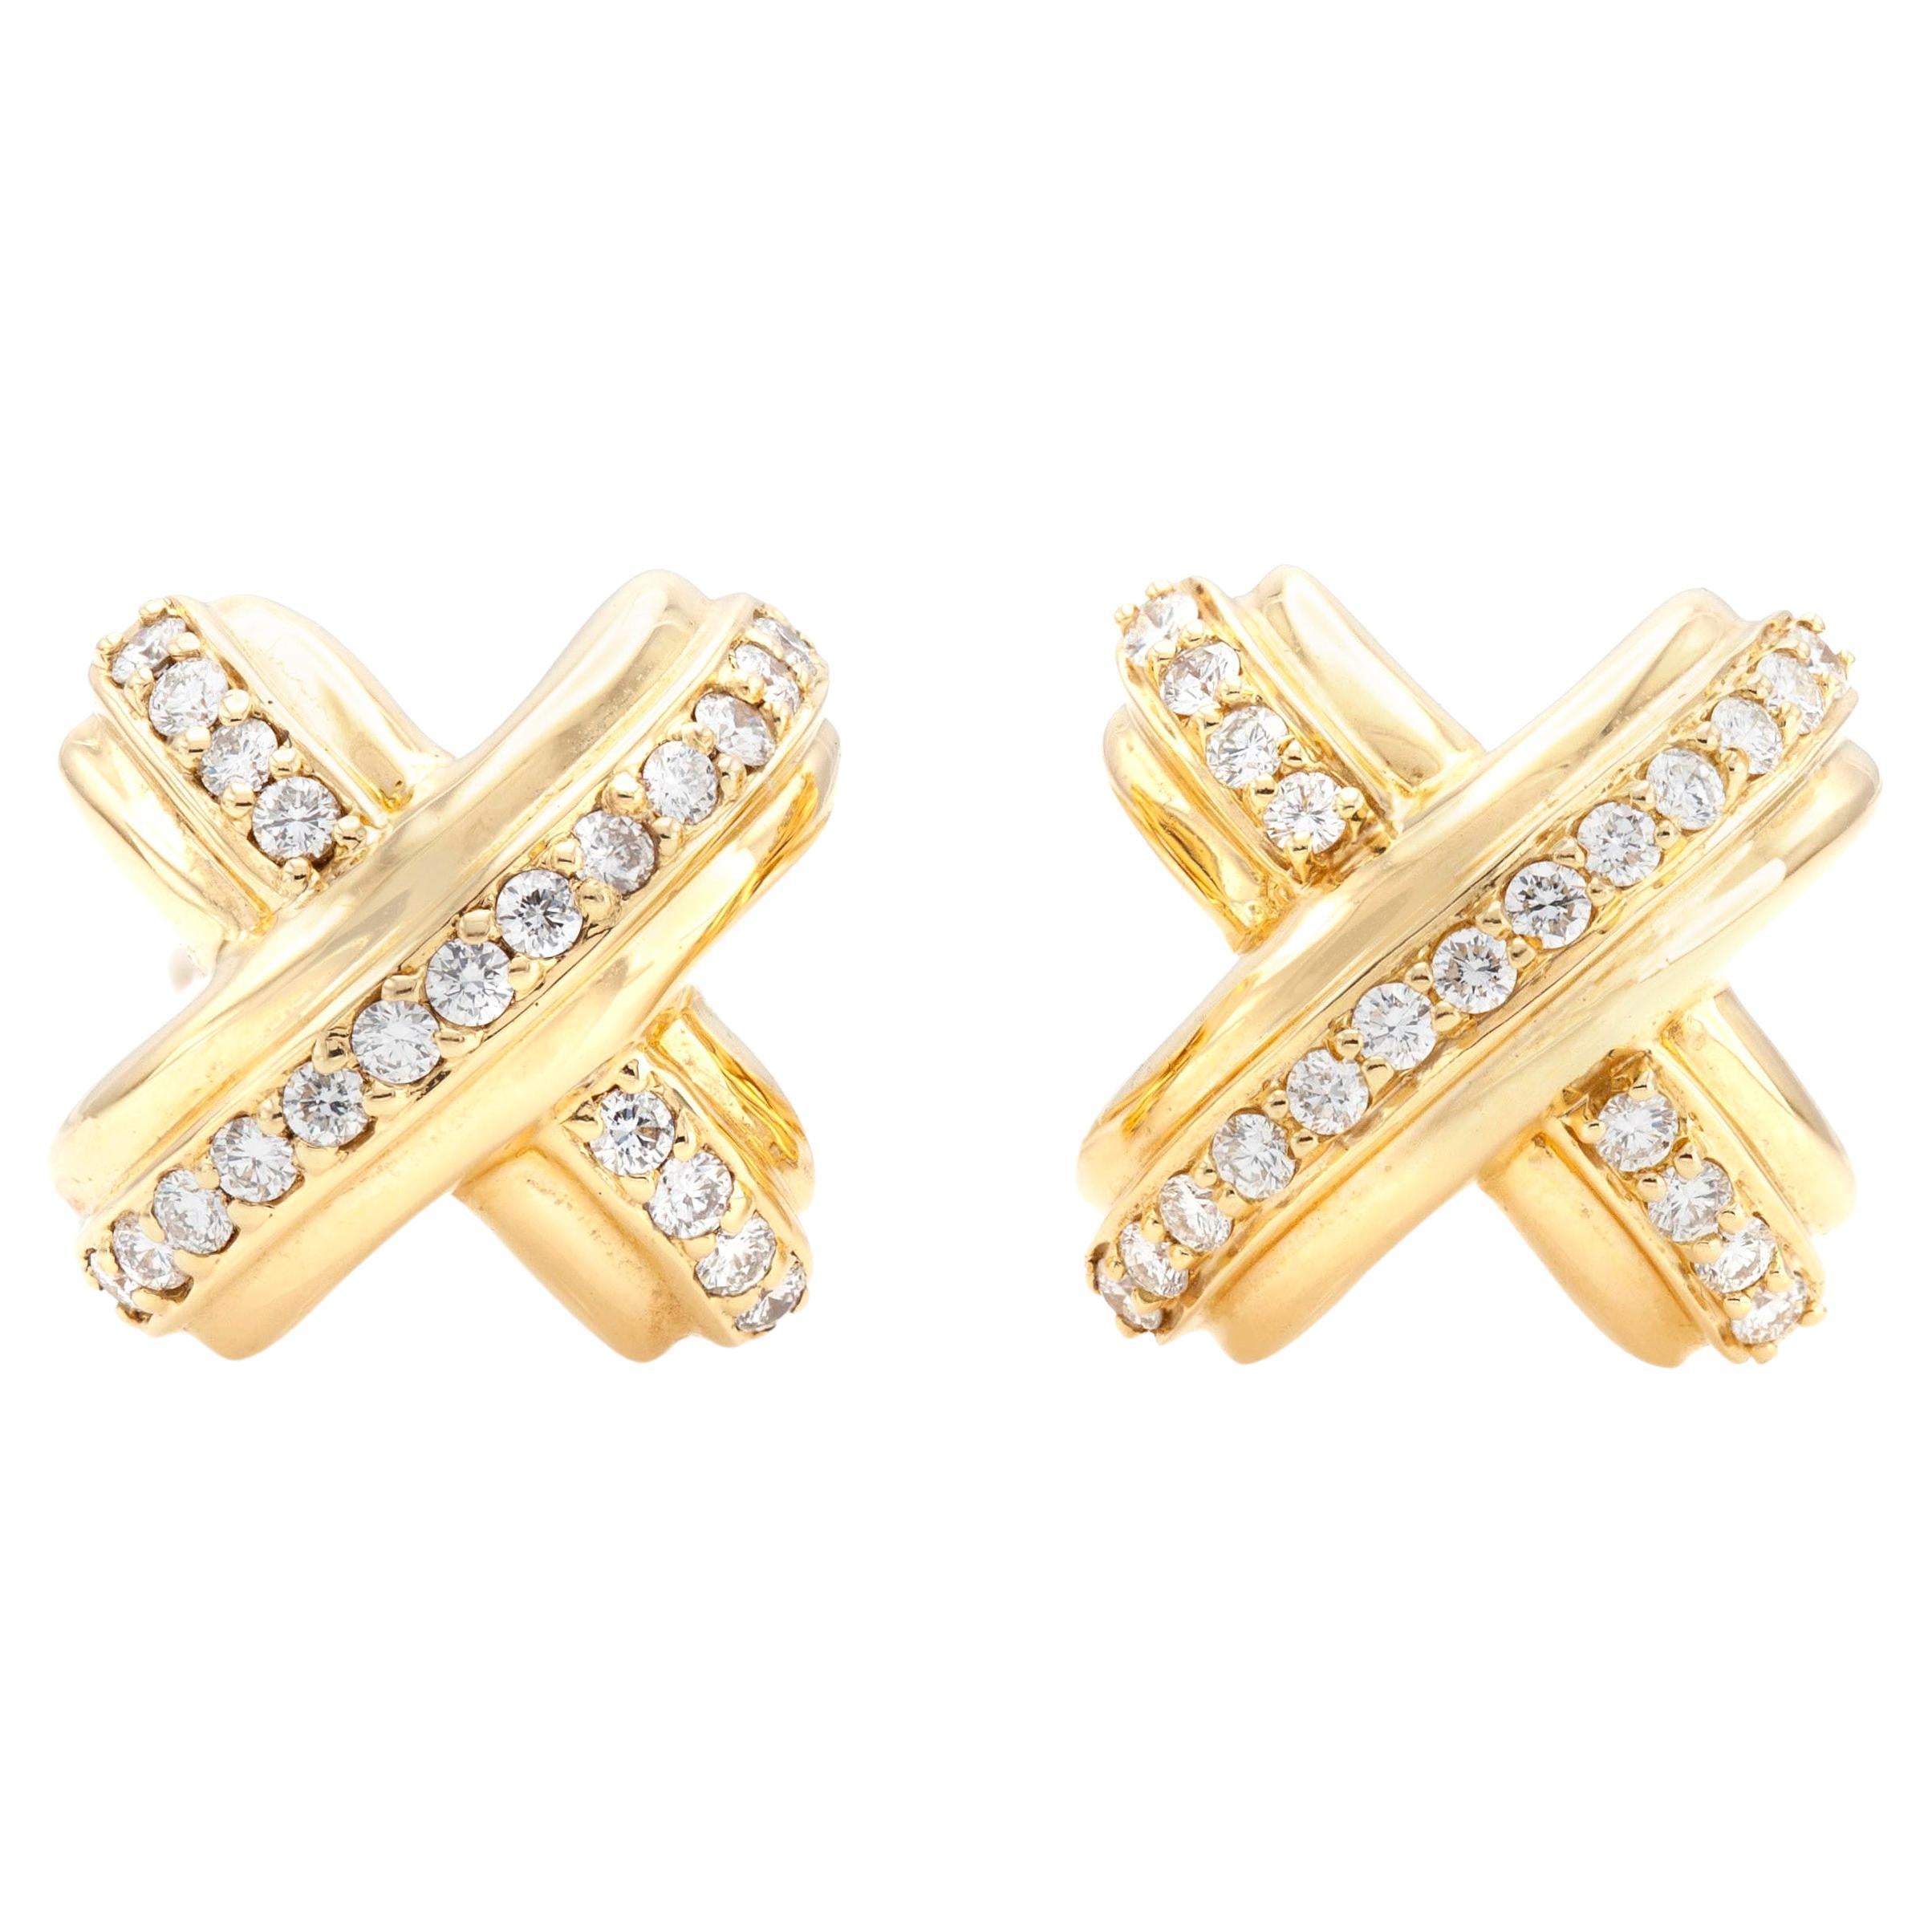 Tiffany & Co. X Gold and Diamond Cufflinks For Sale